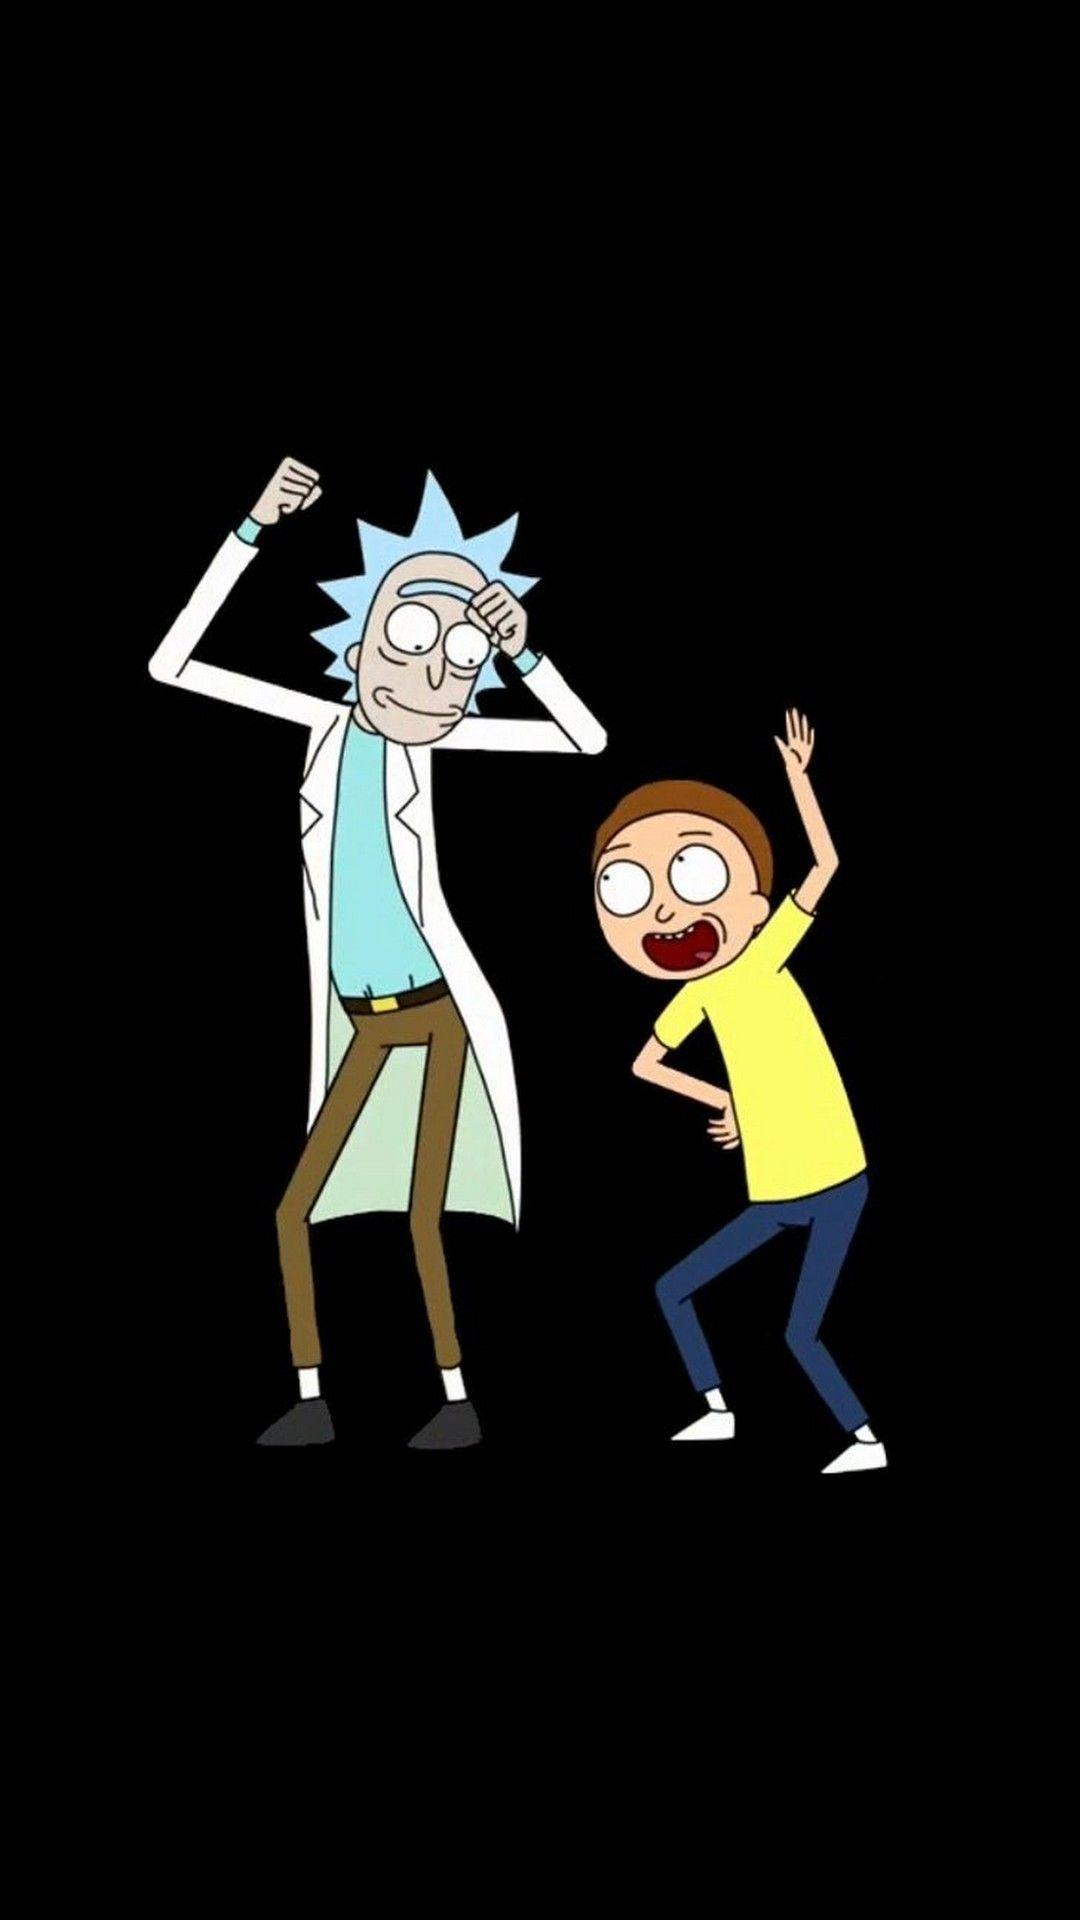 1125x2436 Rick And Morty Fan Art Iphone XS,Iphone 10,Iphone X HD